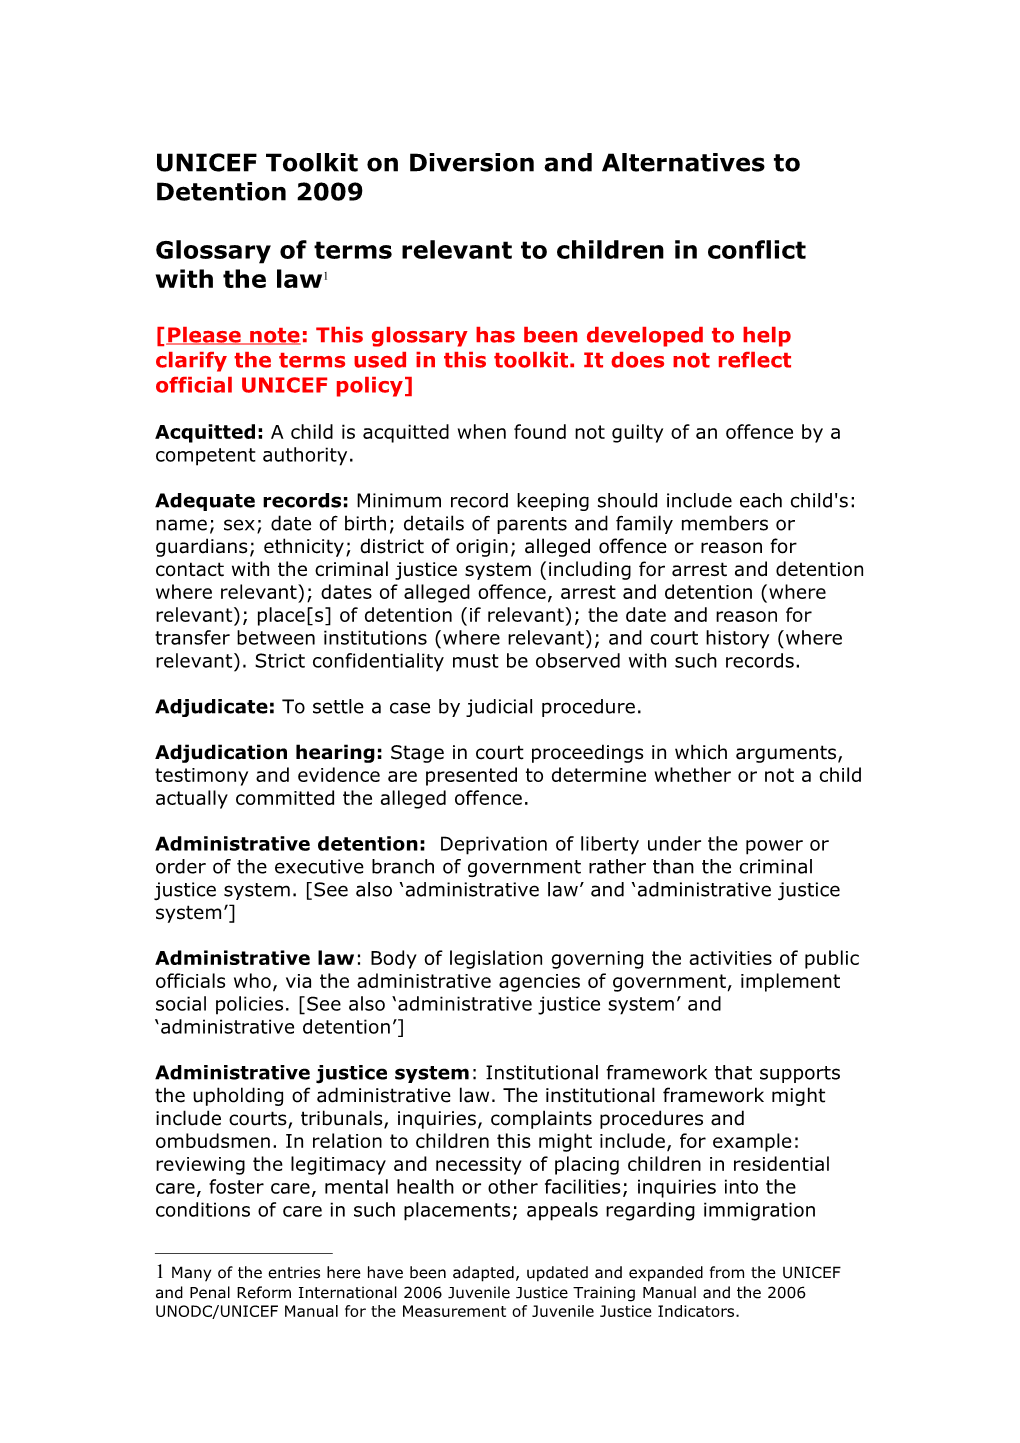 UNICEF and Penal Reform International 2006